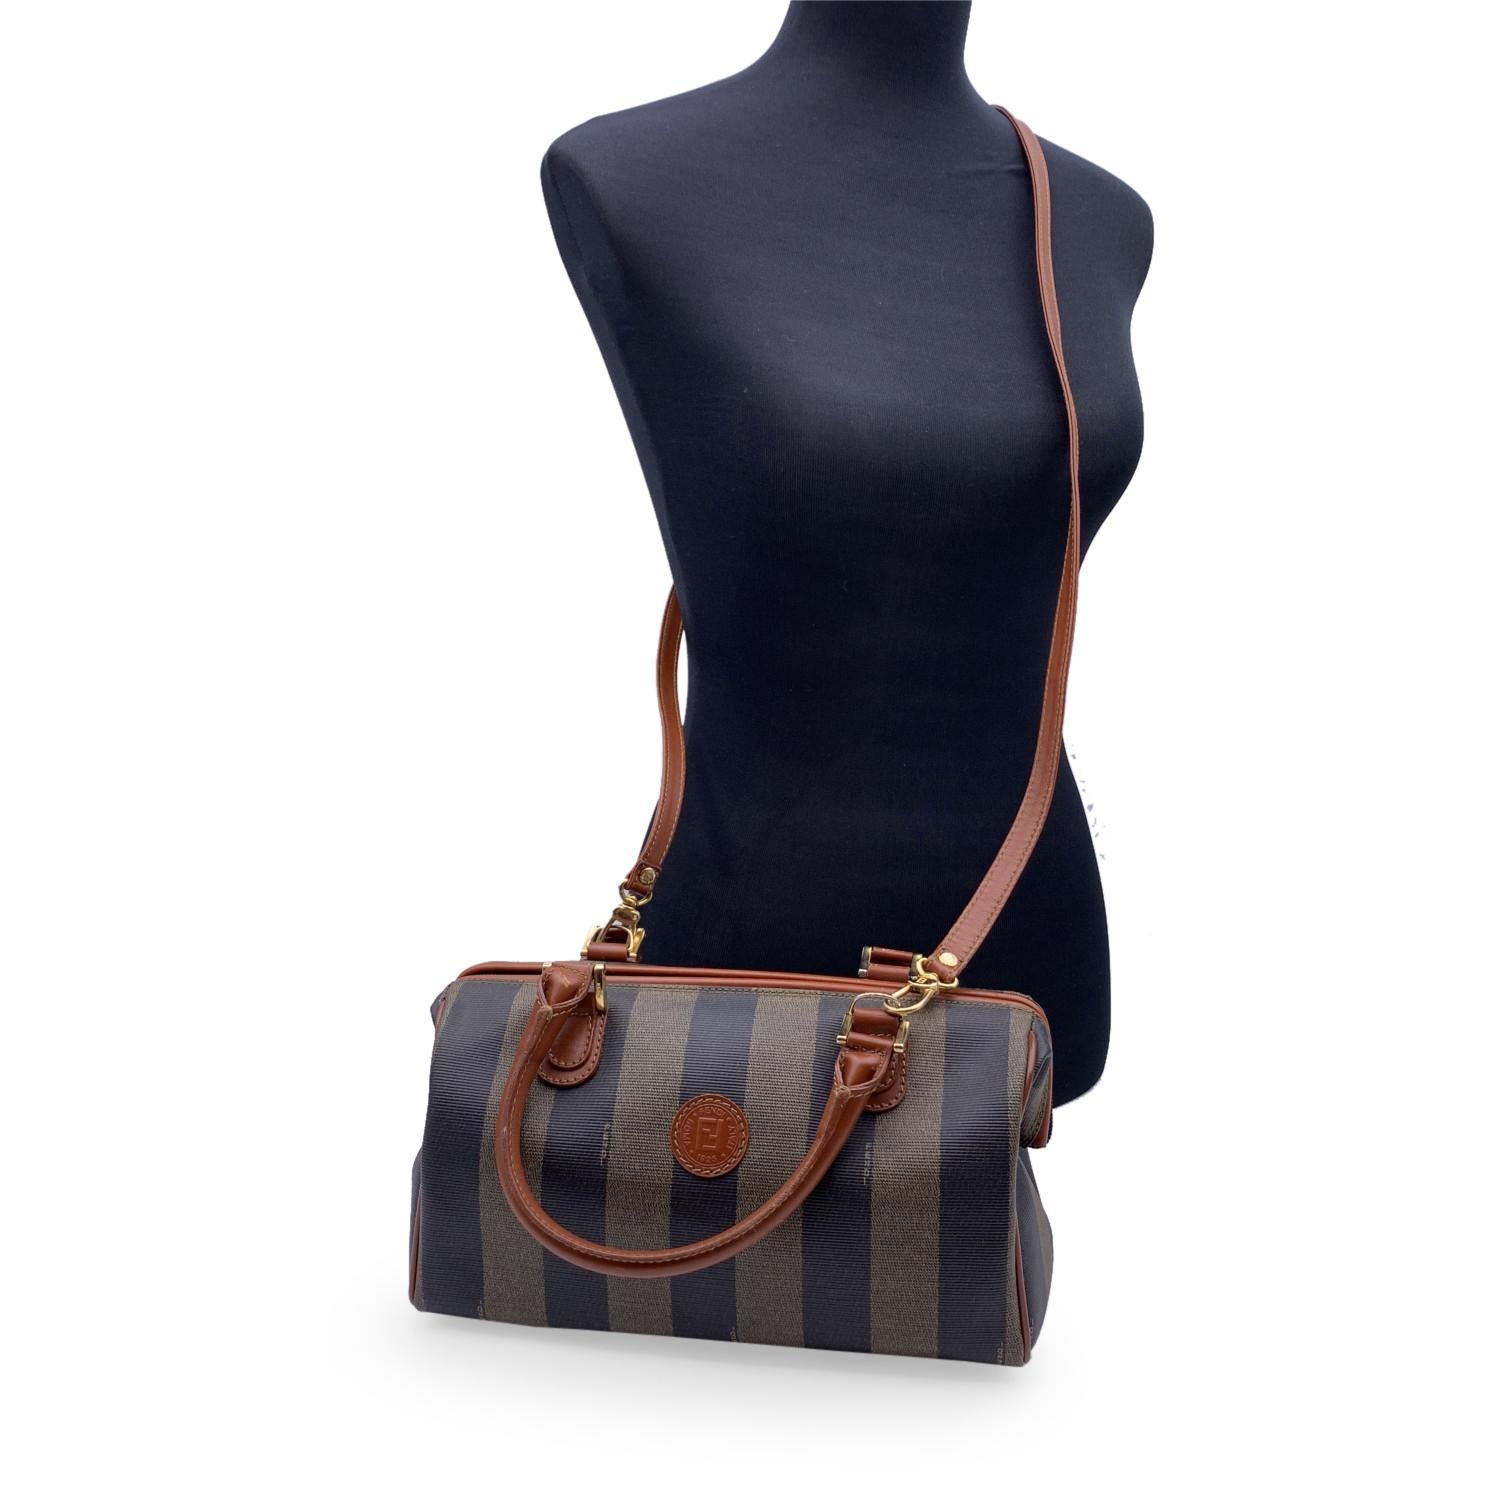 Fendi Vintage Pequin Striped Vinyl Canvas small boston bag. Striped Pequin canvas with brown leather trim and handles. Upper zipper closure. Black canvas lining. Removable shoulder strap. 'Fendi s.a.s. Roma - Made in Italy' embossed